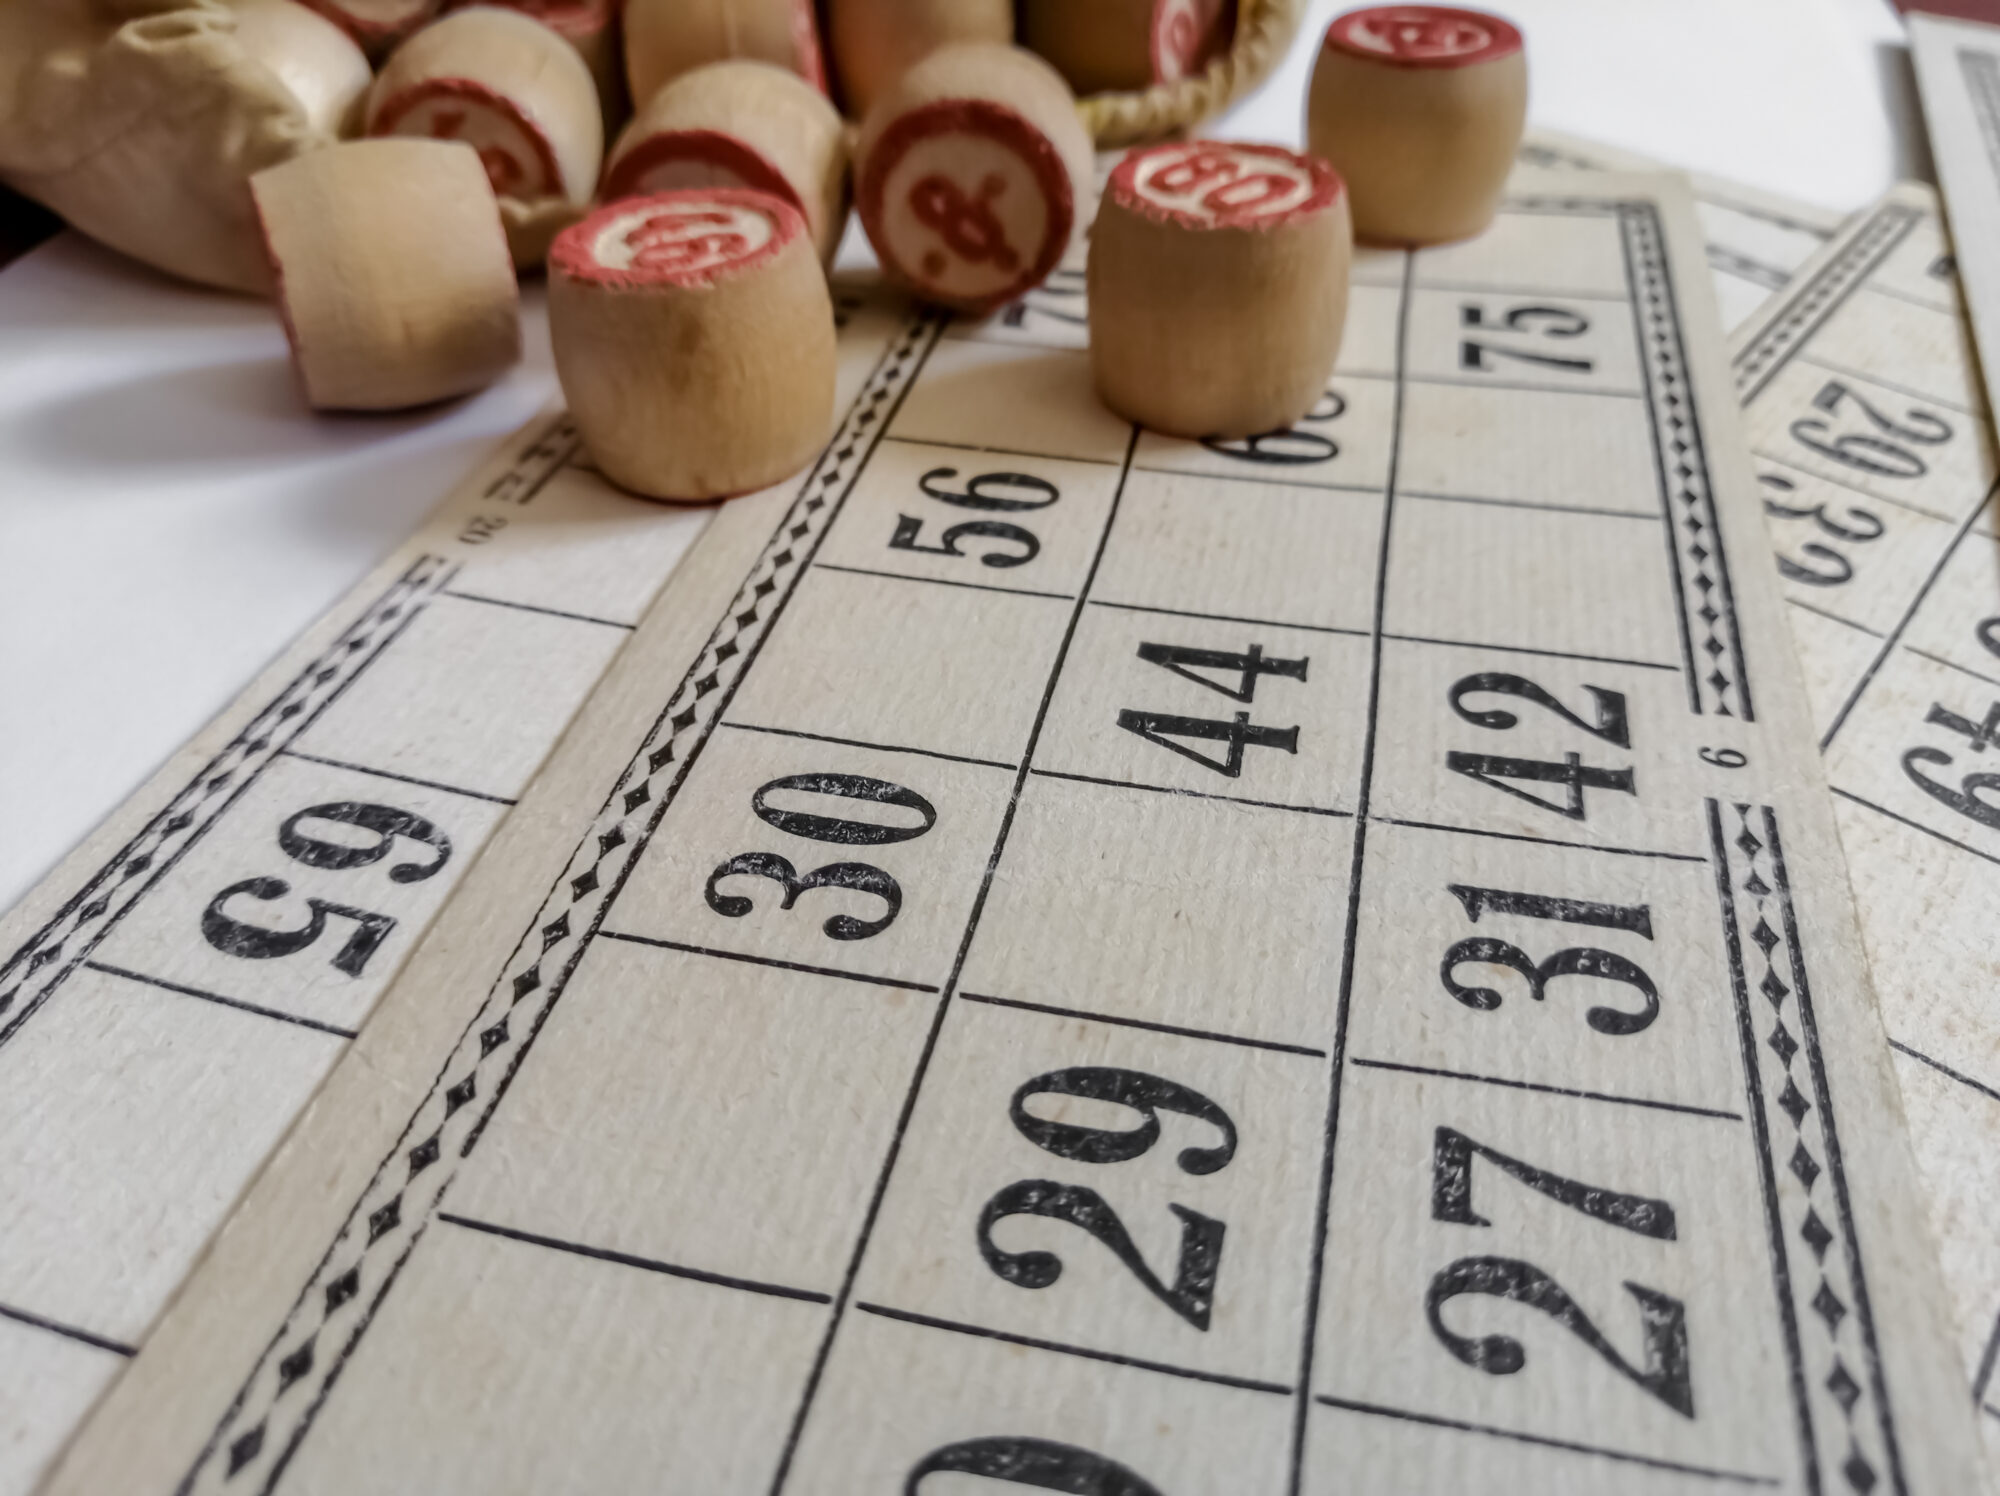 Board game lotto on a white background. Games for the whole family. Cards and barrels for playing lotto.